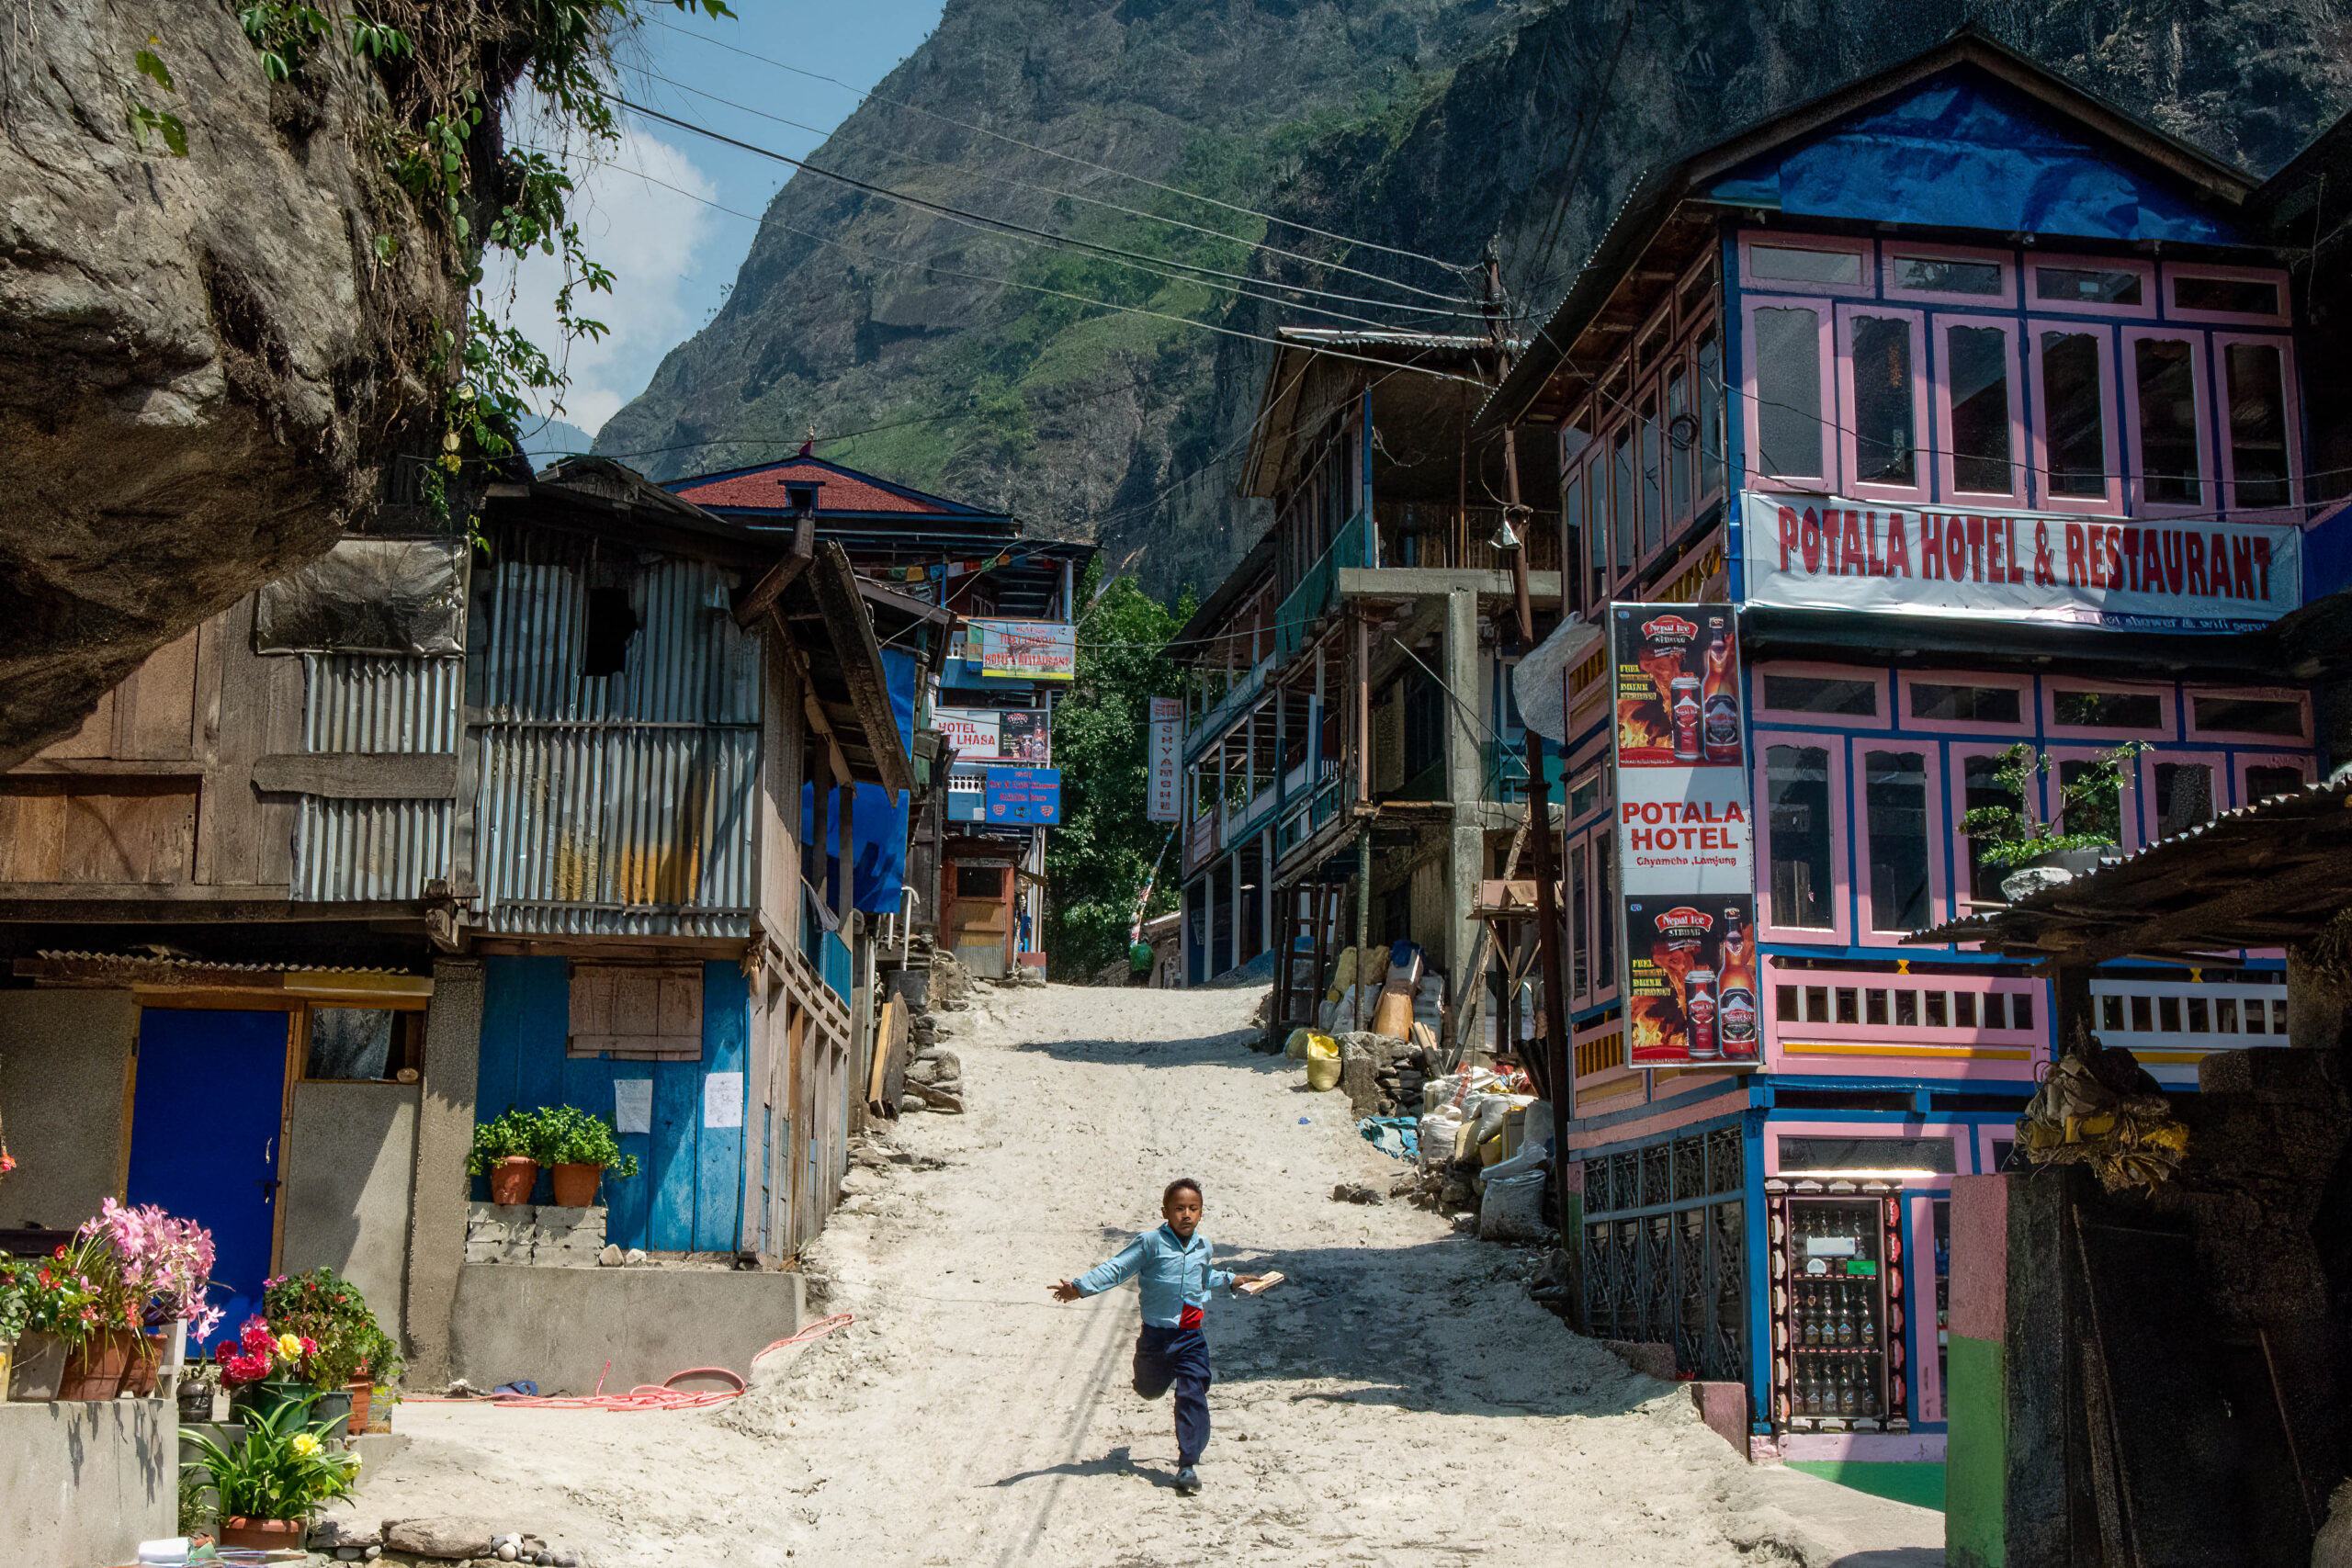 A village located on the Annapurna Circuit